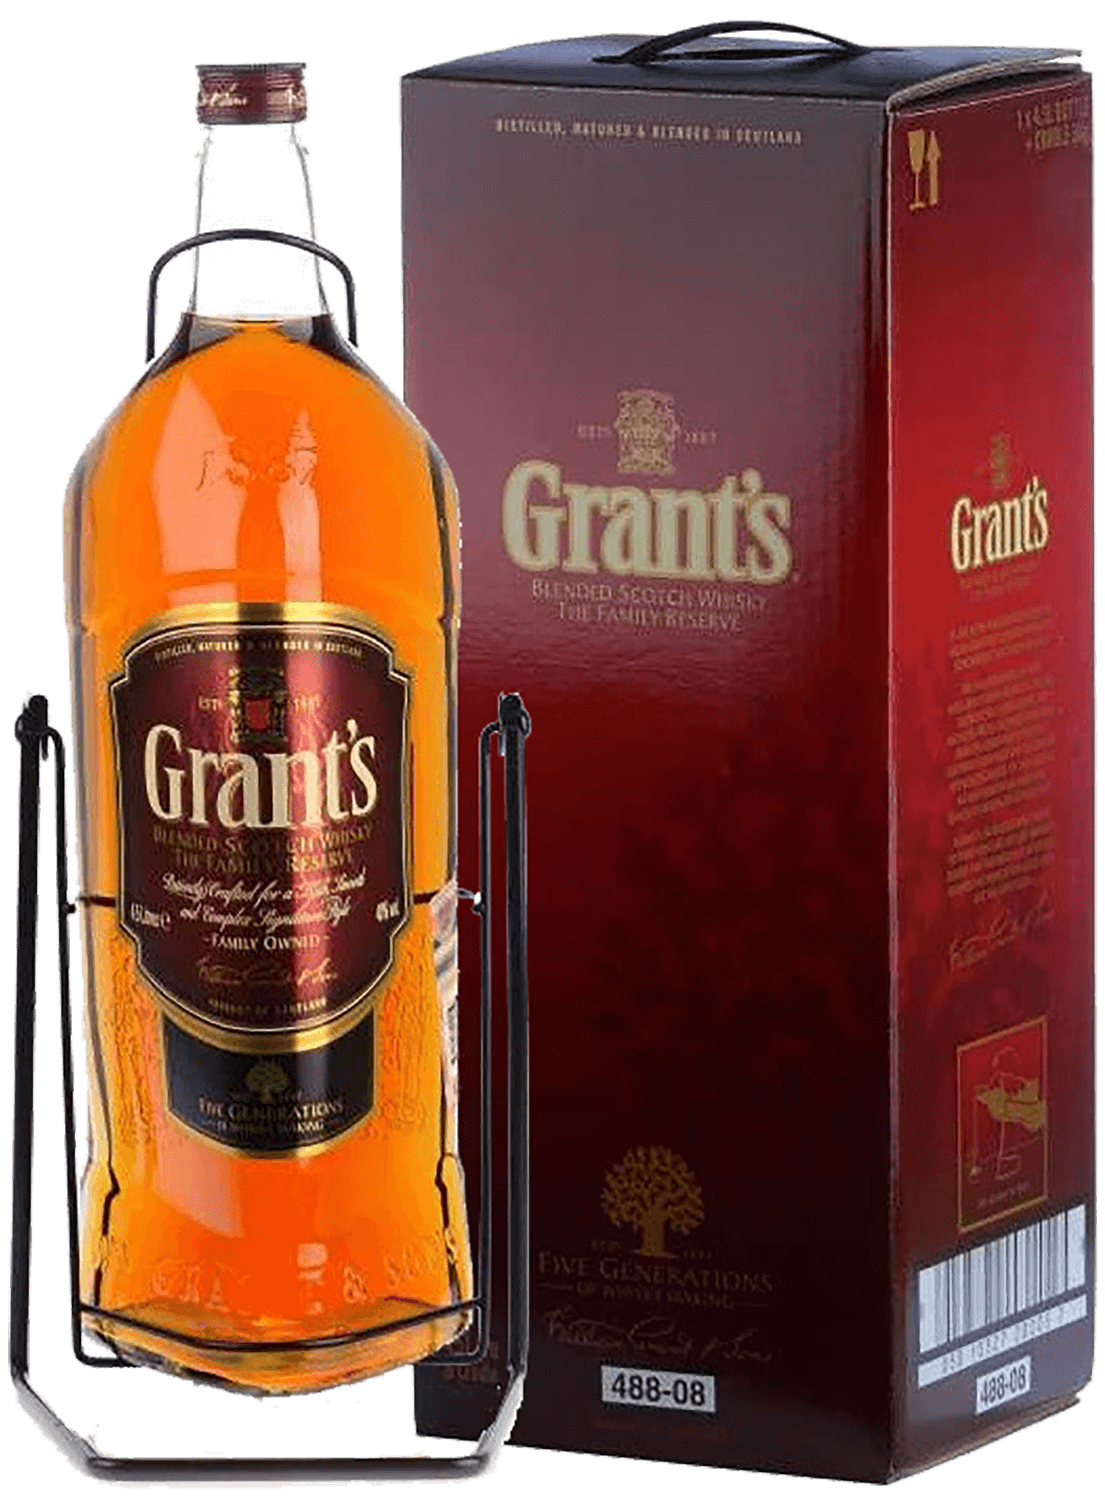 Grant's Family Reserve Blended Scotch Whisky (gift box) dewar s special reserve 12 y o blended scotch whiskey gift box